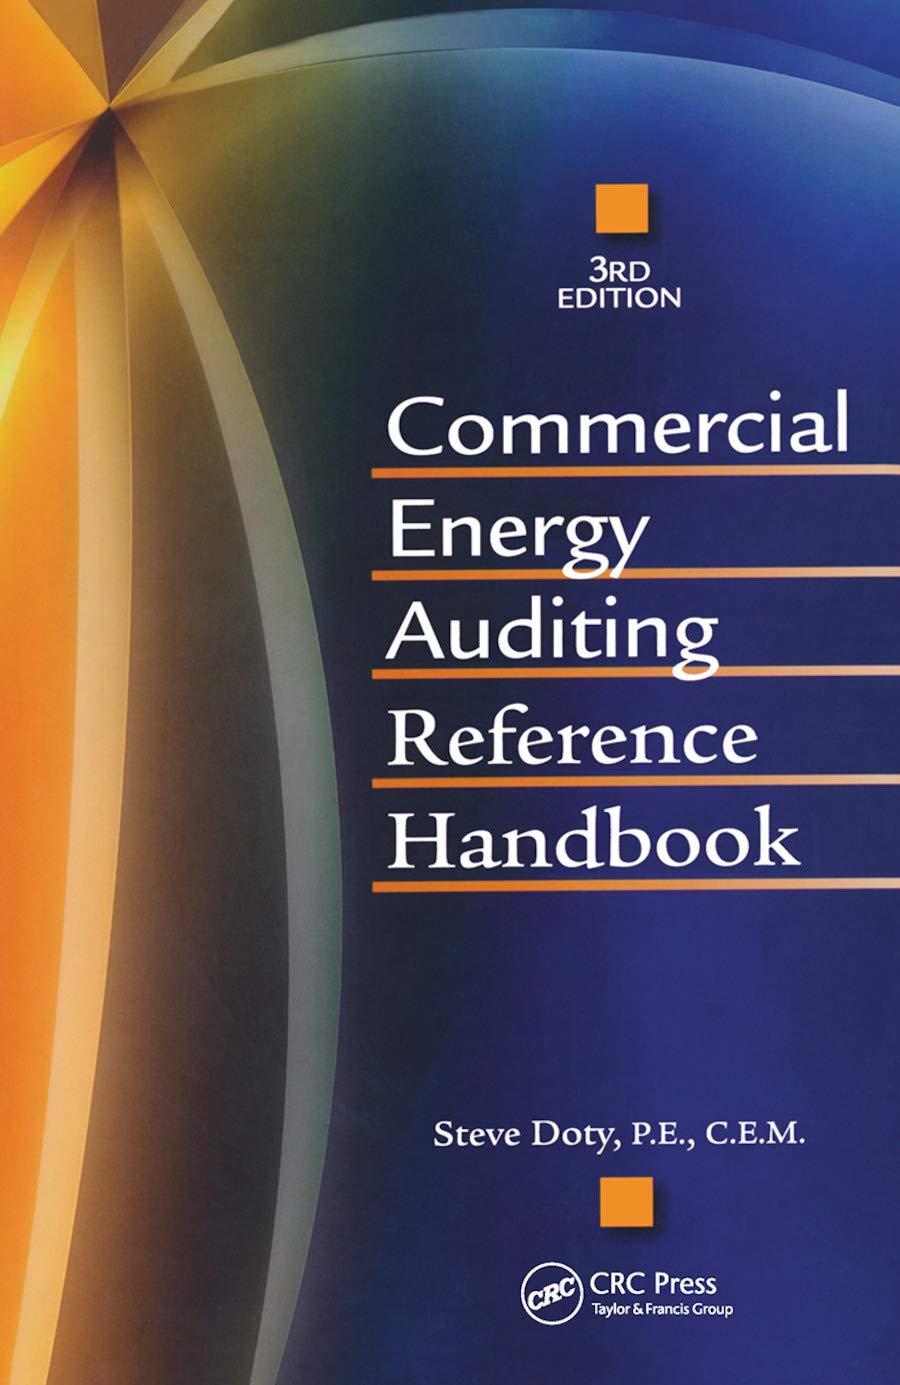 commercial energy auditing reference handbook 3rd edition steve doty 1498769268, 978-1498769266